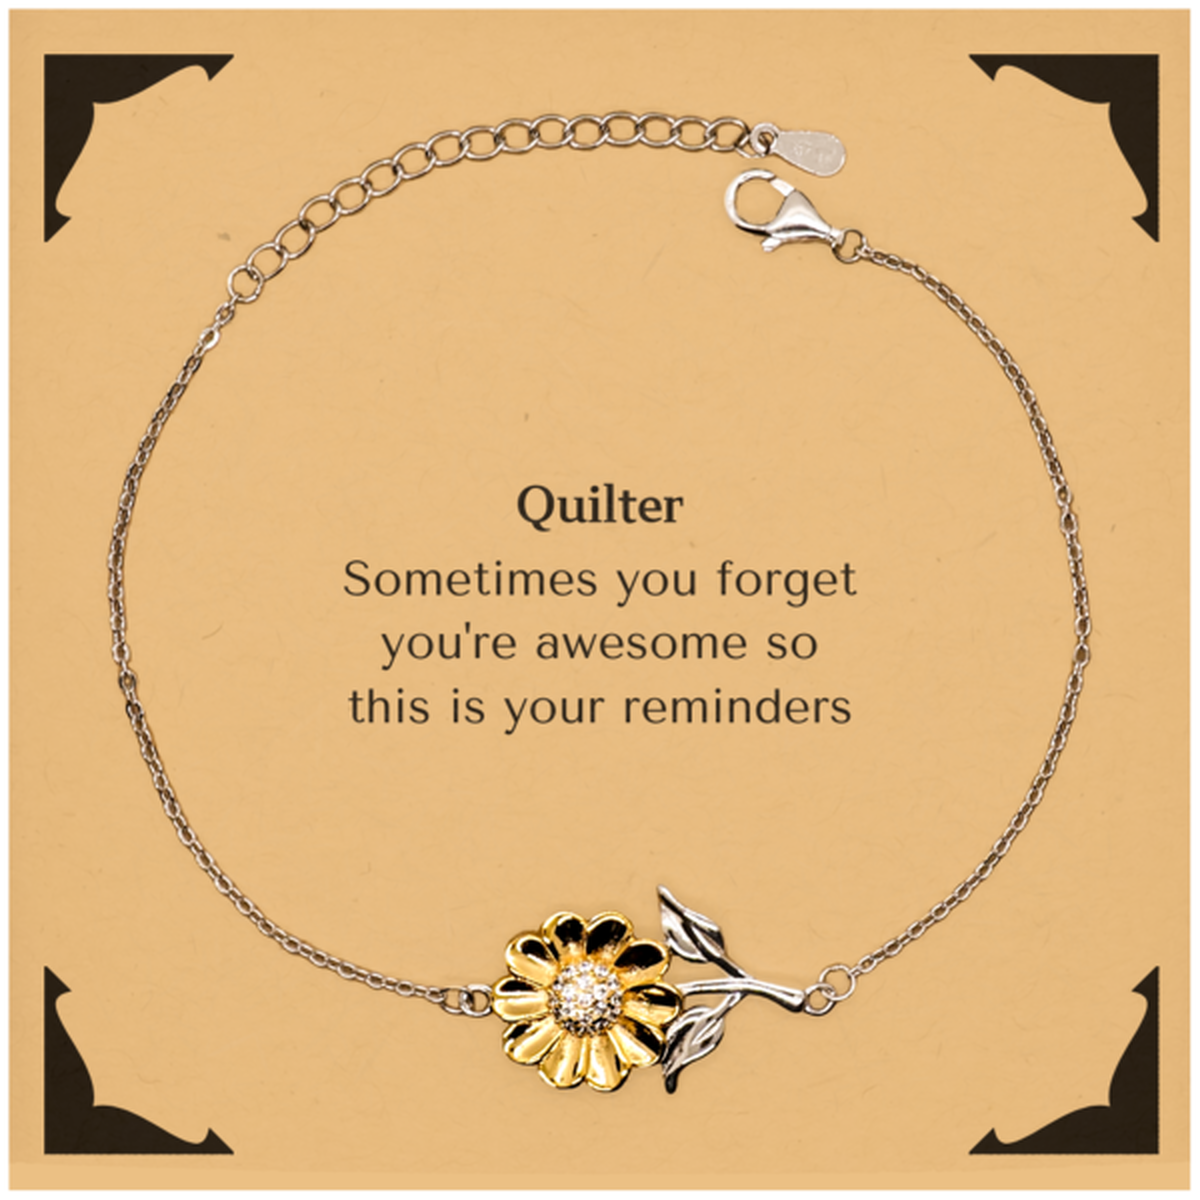 Sentimental Quilter Sunflower Bracelet, Quilter Sometimes you forget you're awesome so this is your reminders, Graduation Christmas Birthday Gifts for Quilter, Men, Women, Coworkers